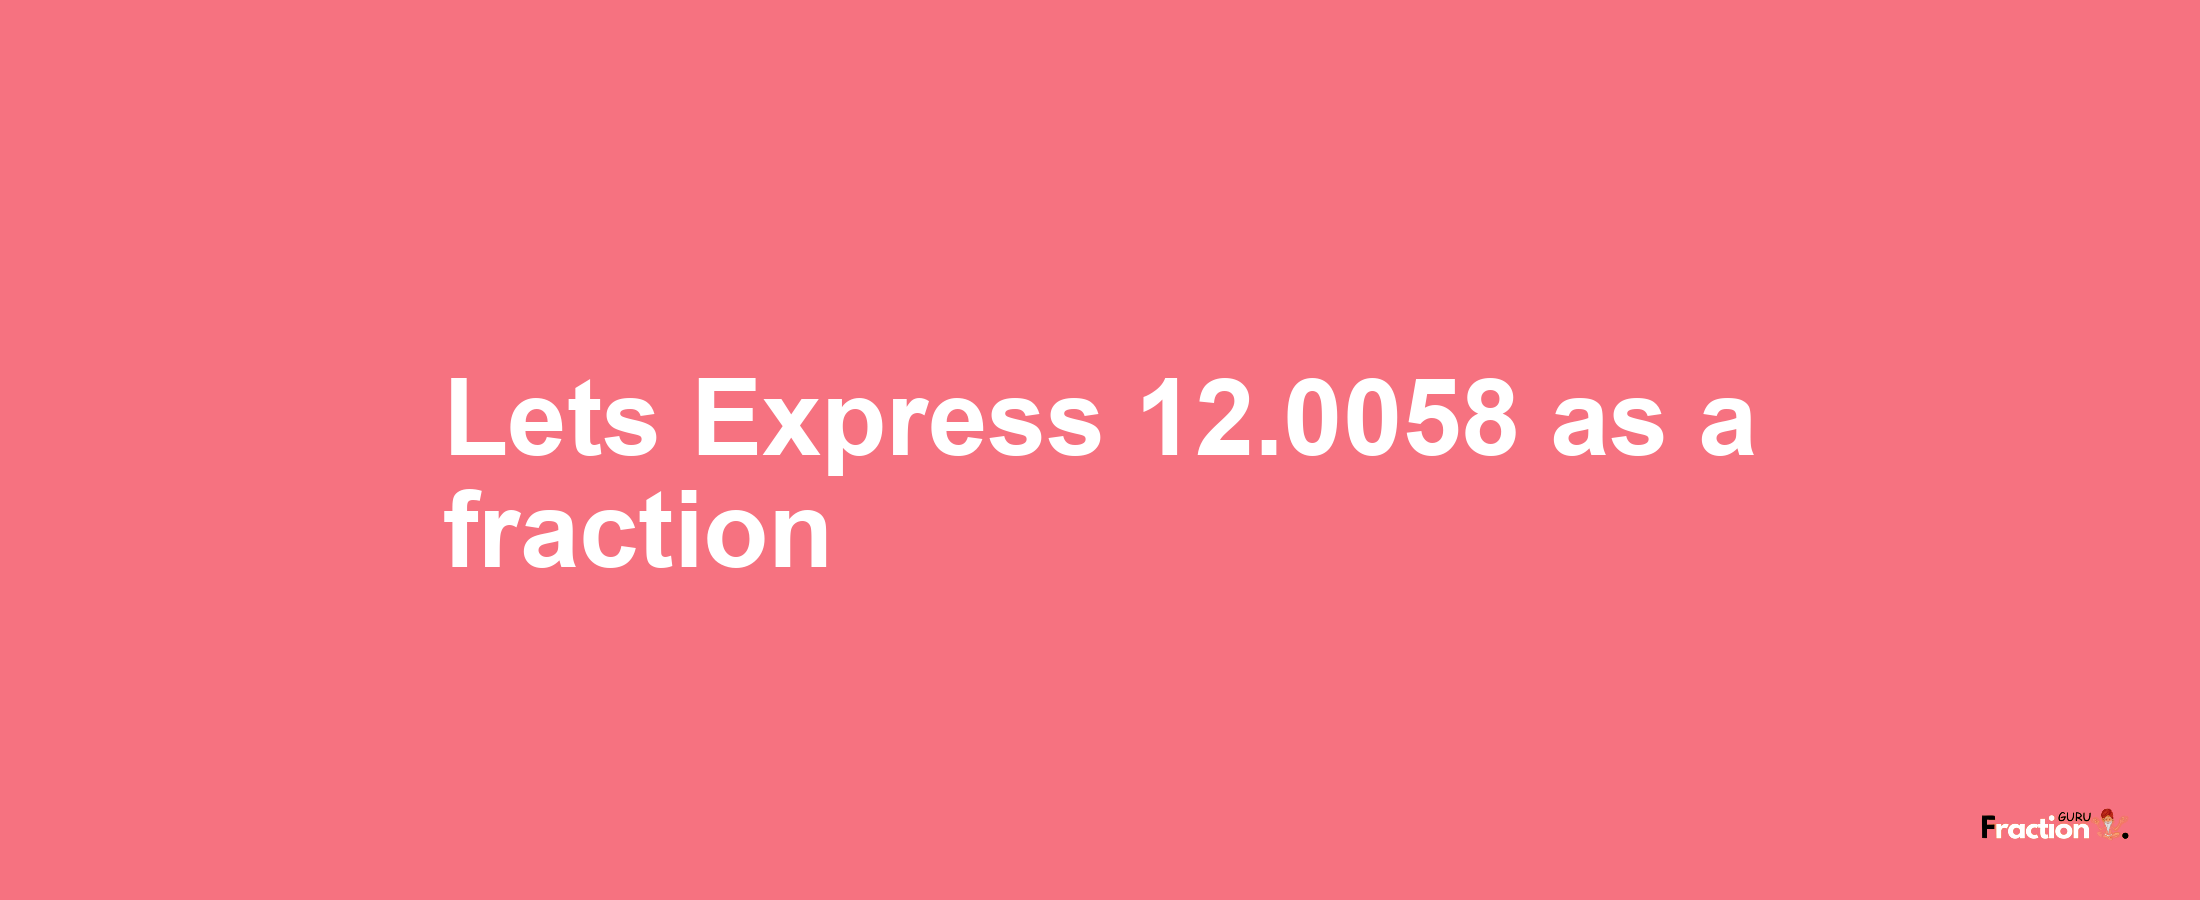 Lets Express 12.0058 as afraction